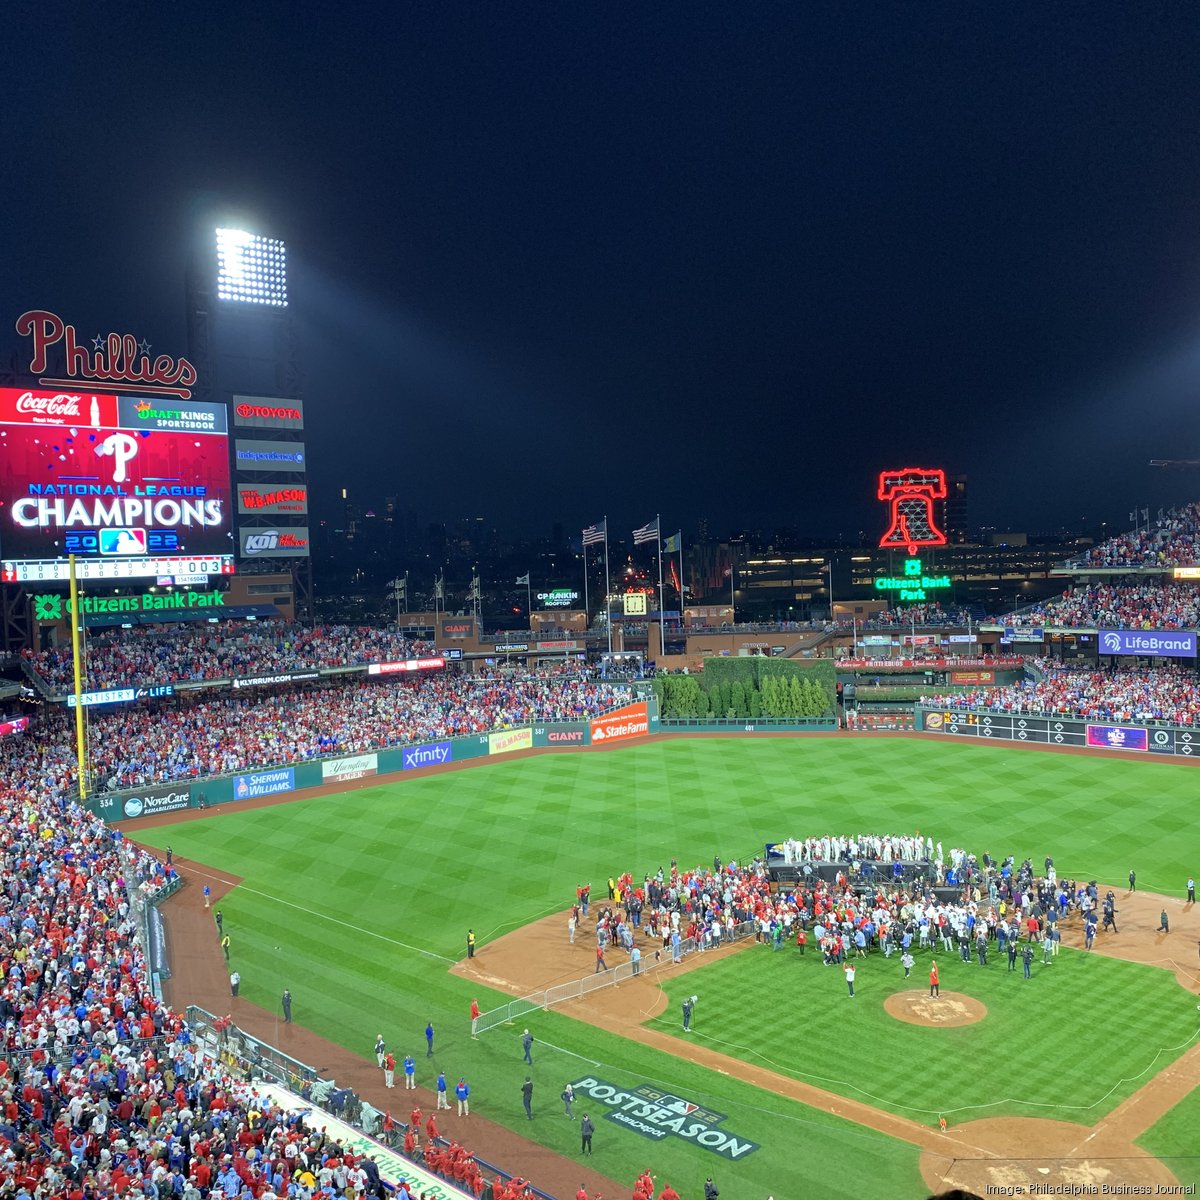 Phillies 2022 playoffs: How the team's business side is benefitting from  postseason run - Philadelphia Business Journal